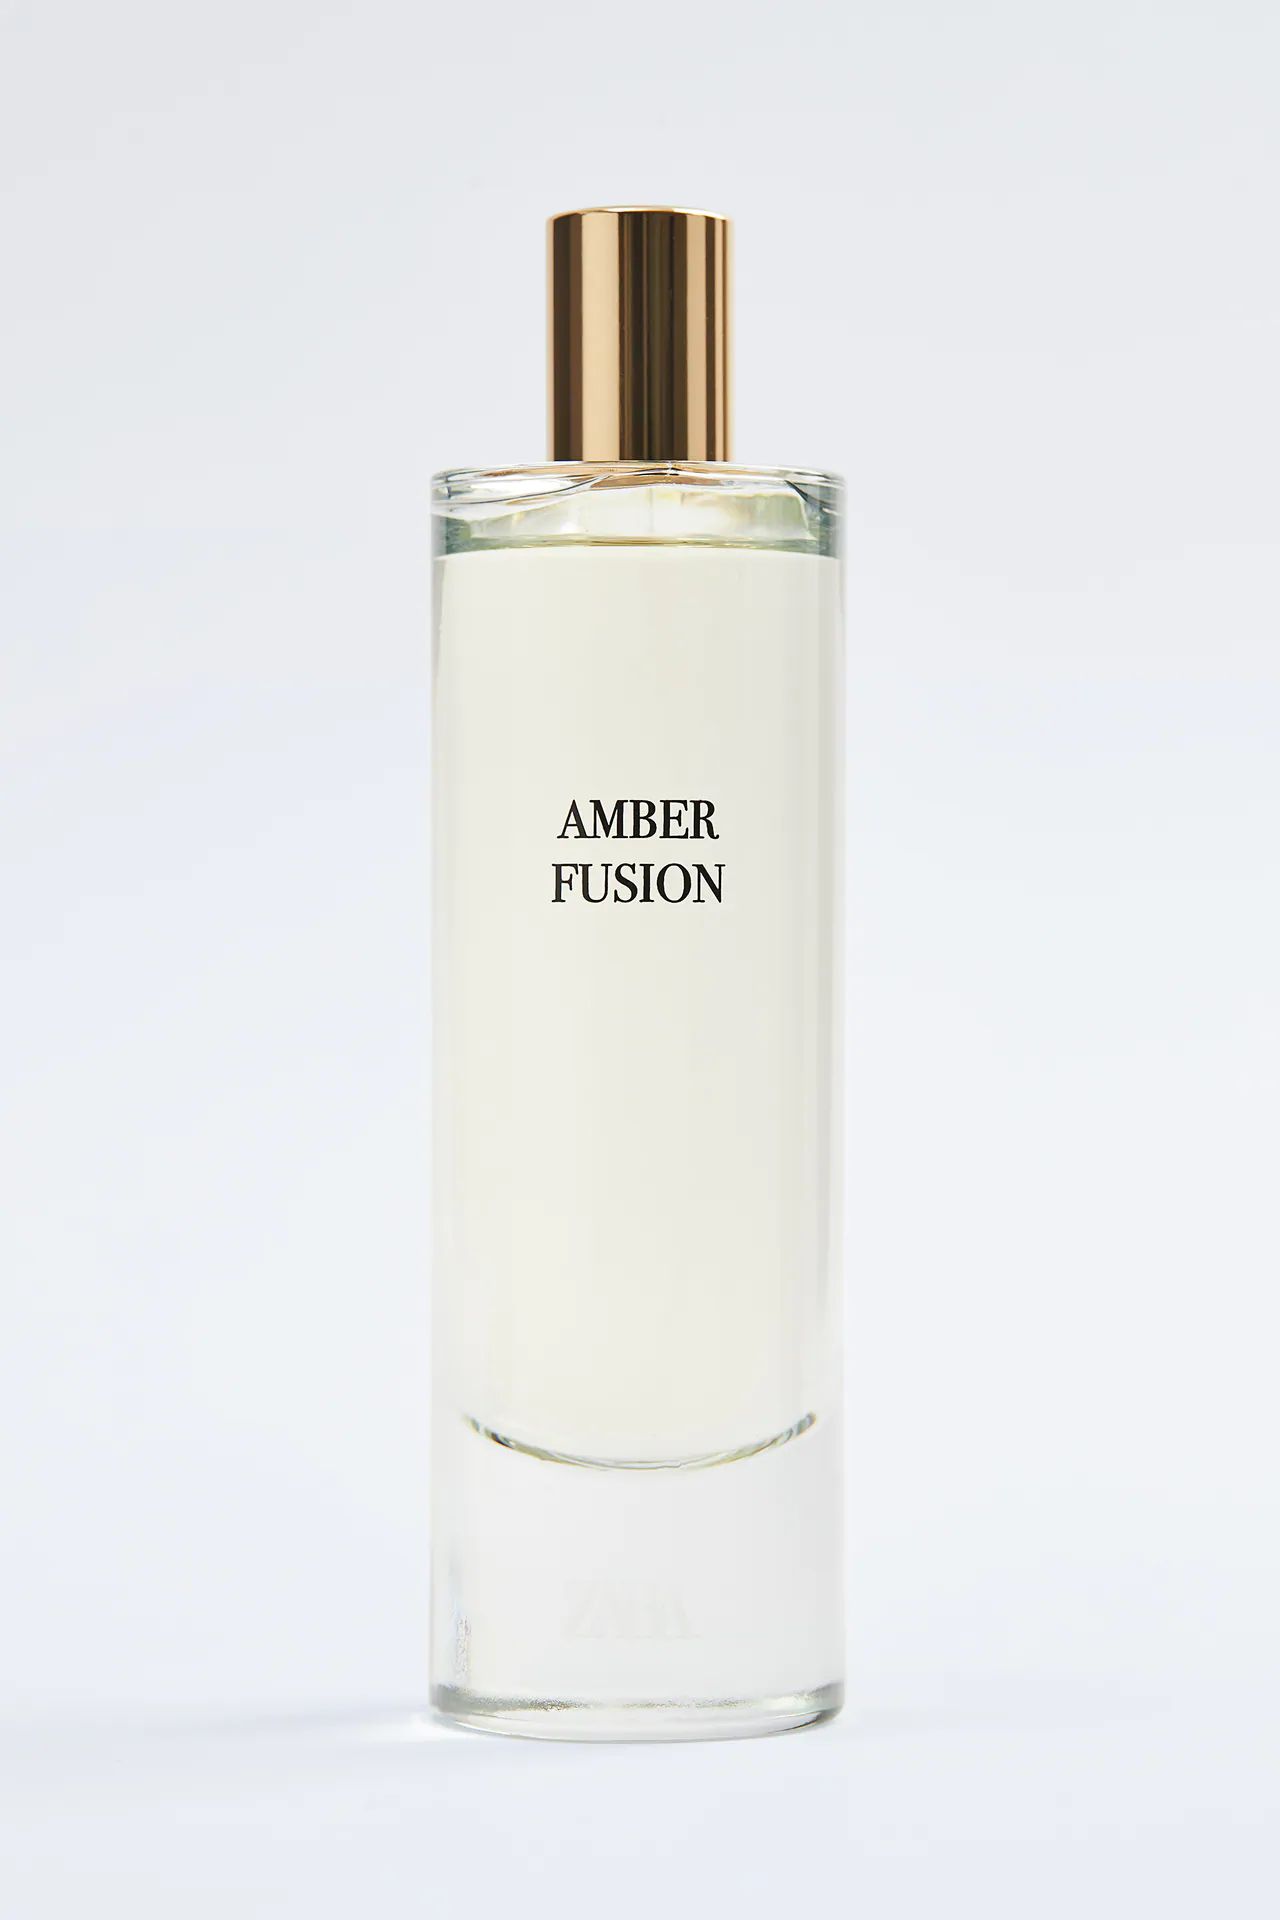 Amber Fusion For Him Zara cologne - a 